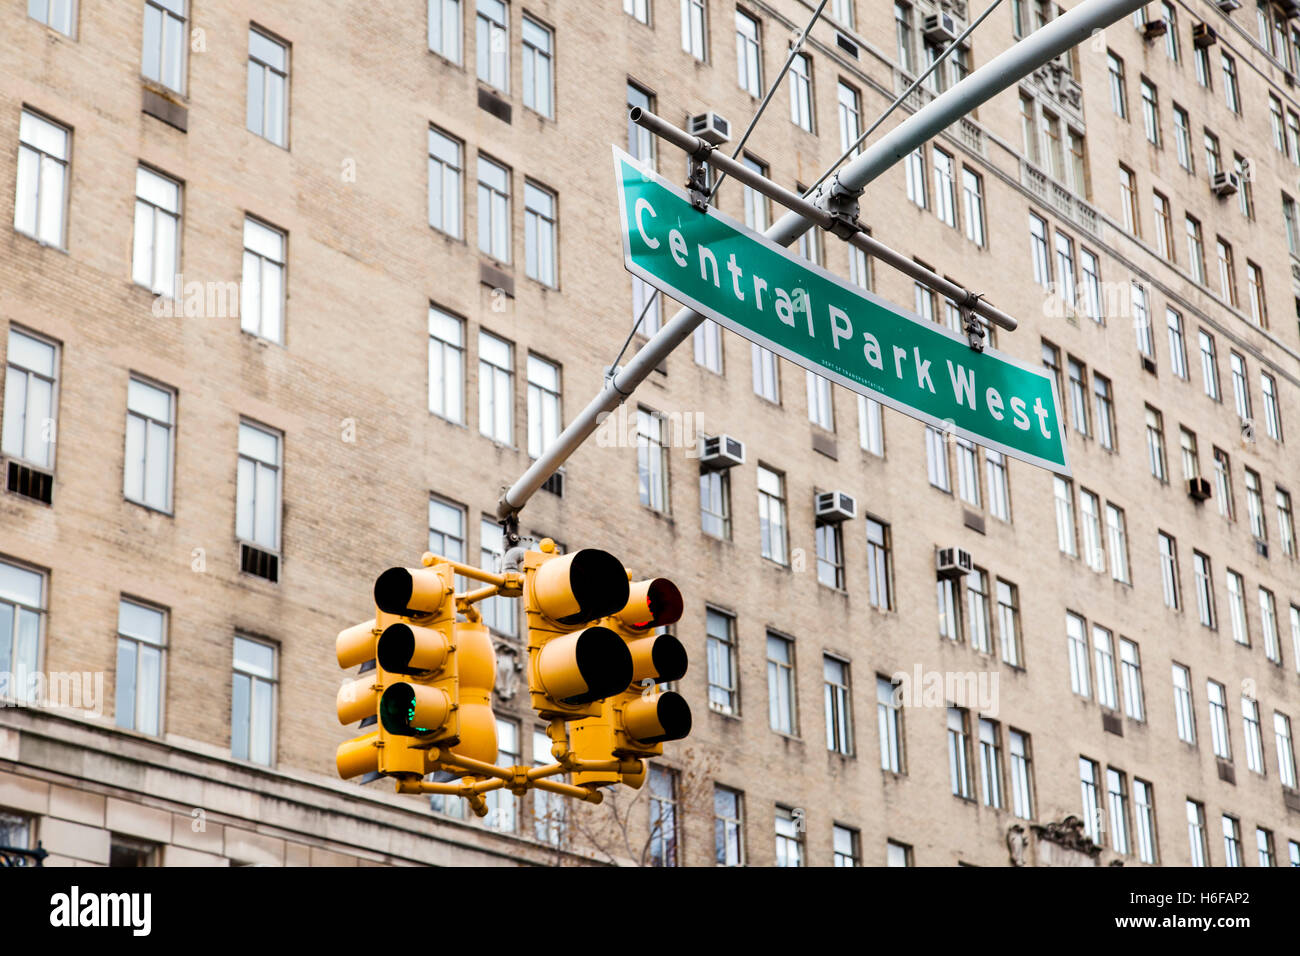 Traffic lights and green Overhead street sign depicting it is Central Park West in Manhattan, New-York, with a high rise residen Stock Photo